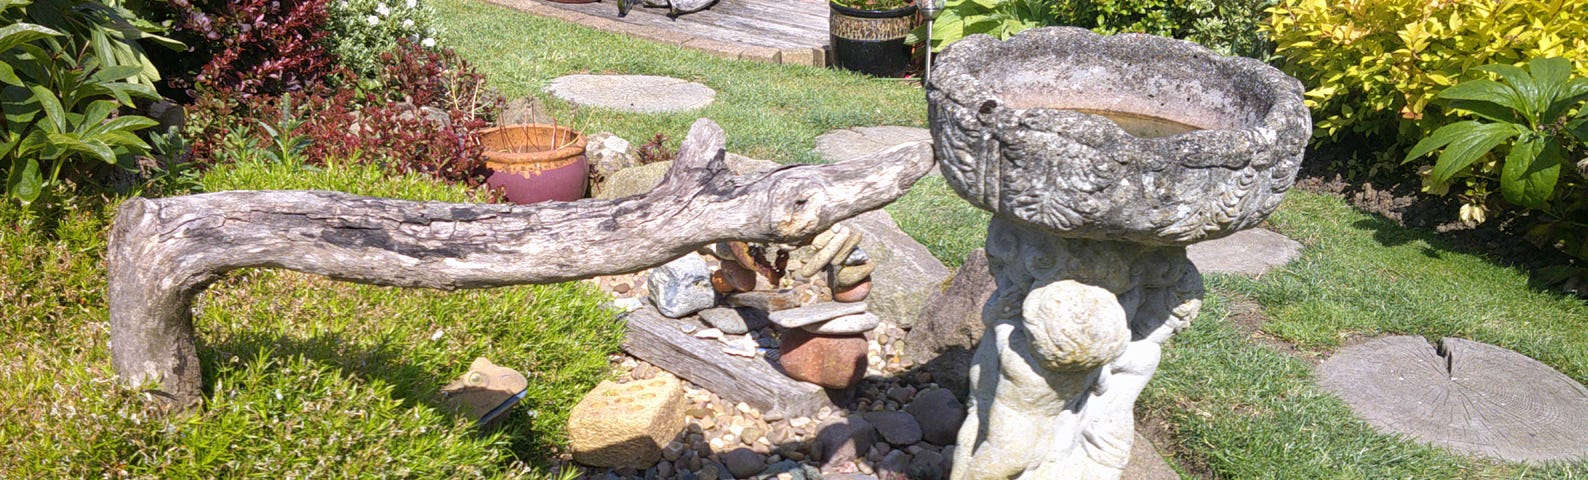 Photograph of a garden showing recycled objects of metal and driftwood in the borders amongst the plants, and in this case a long piece of a branch in the shape of the head and neck of a bird, or it could be a snake,  appearing to take a drink from a birdbath